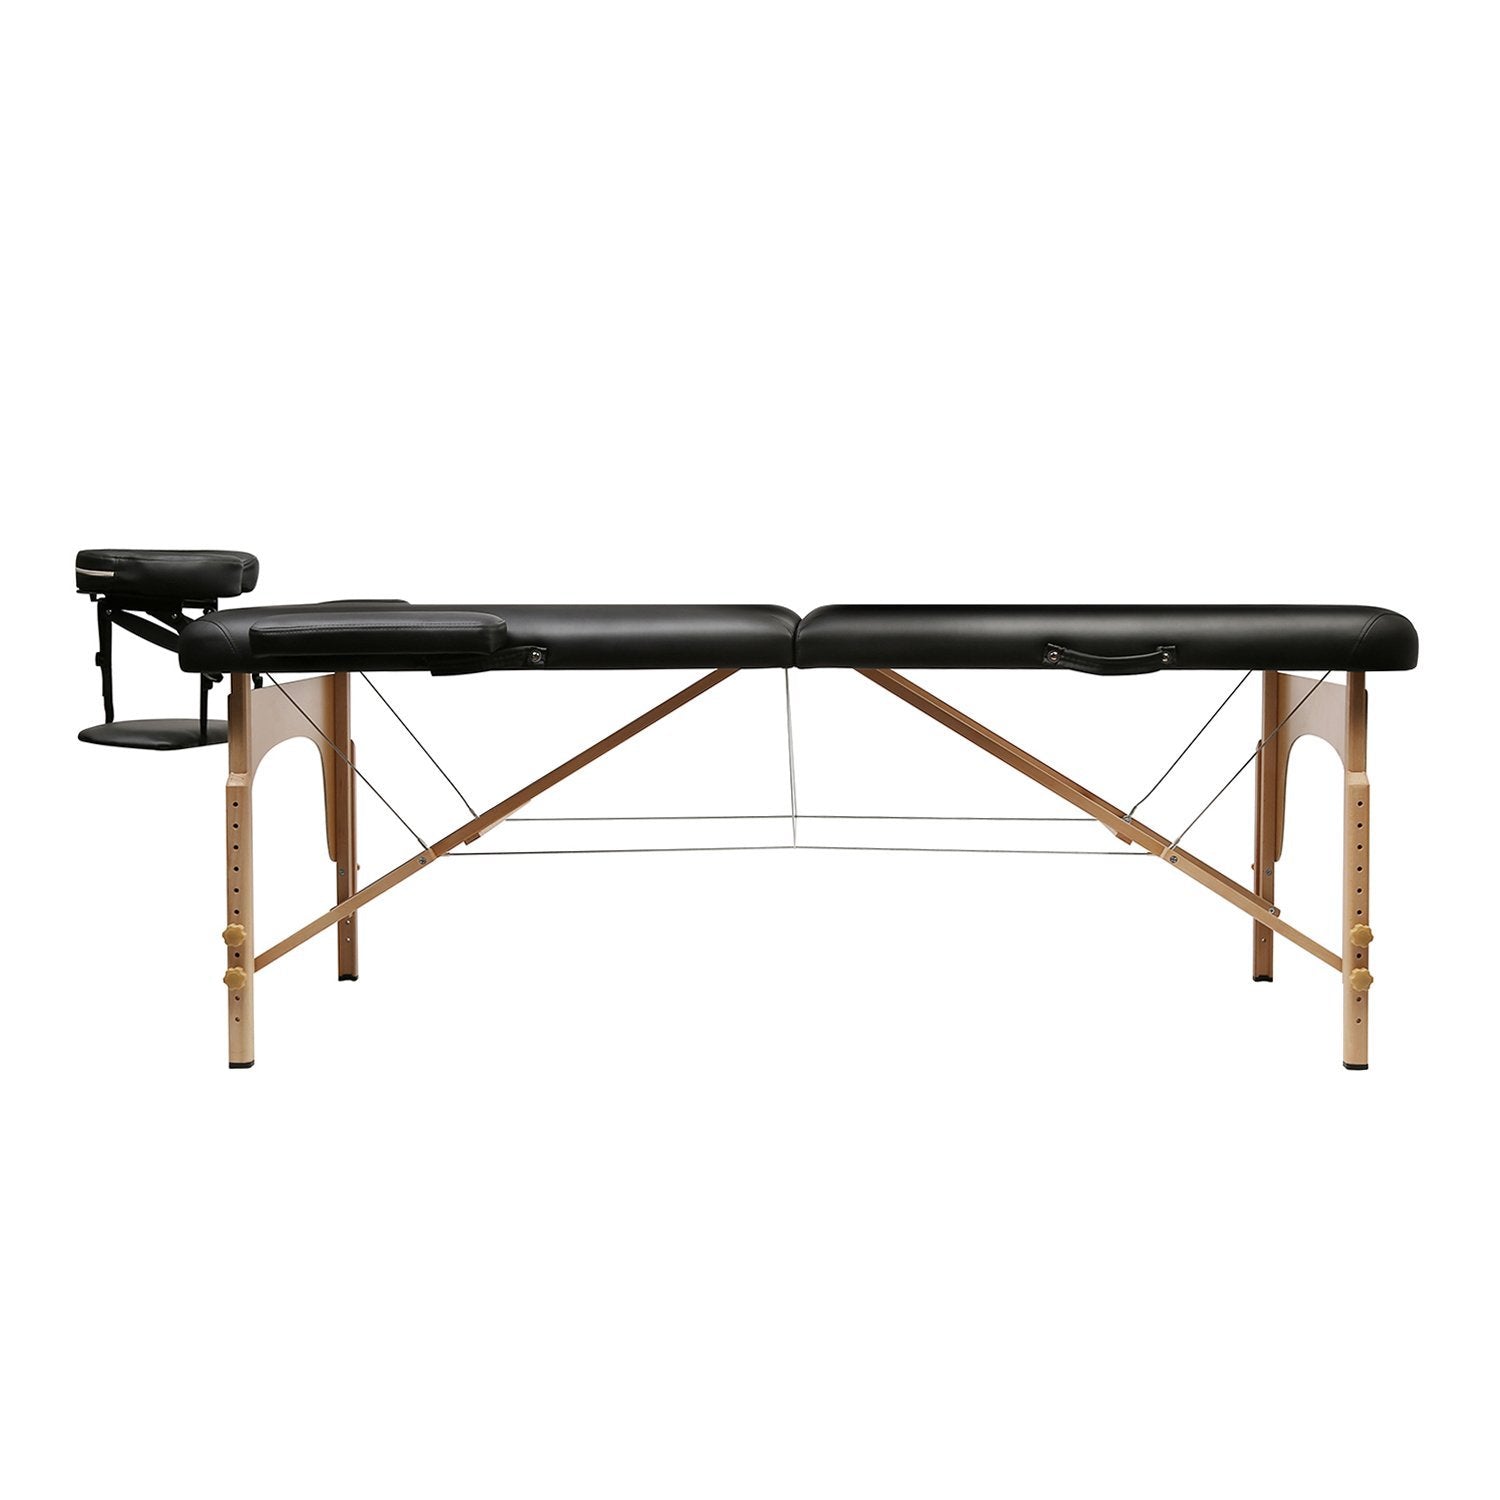 Load image into Gallery viewer, Naipo Portable Massage Table with Wooden Feet - NAIPO
